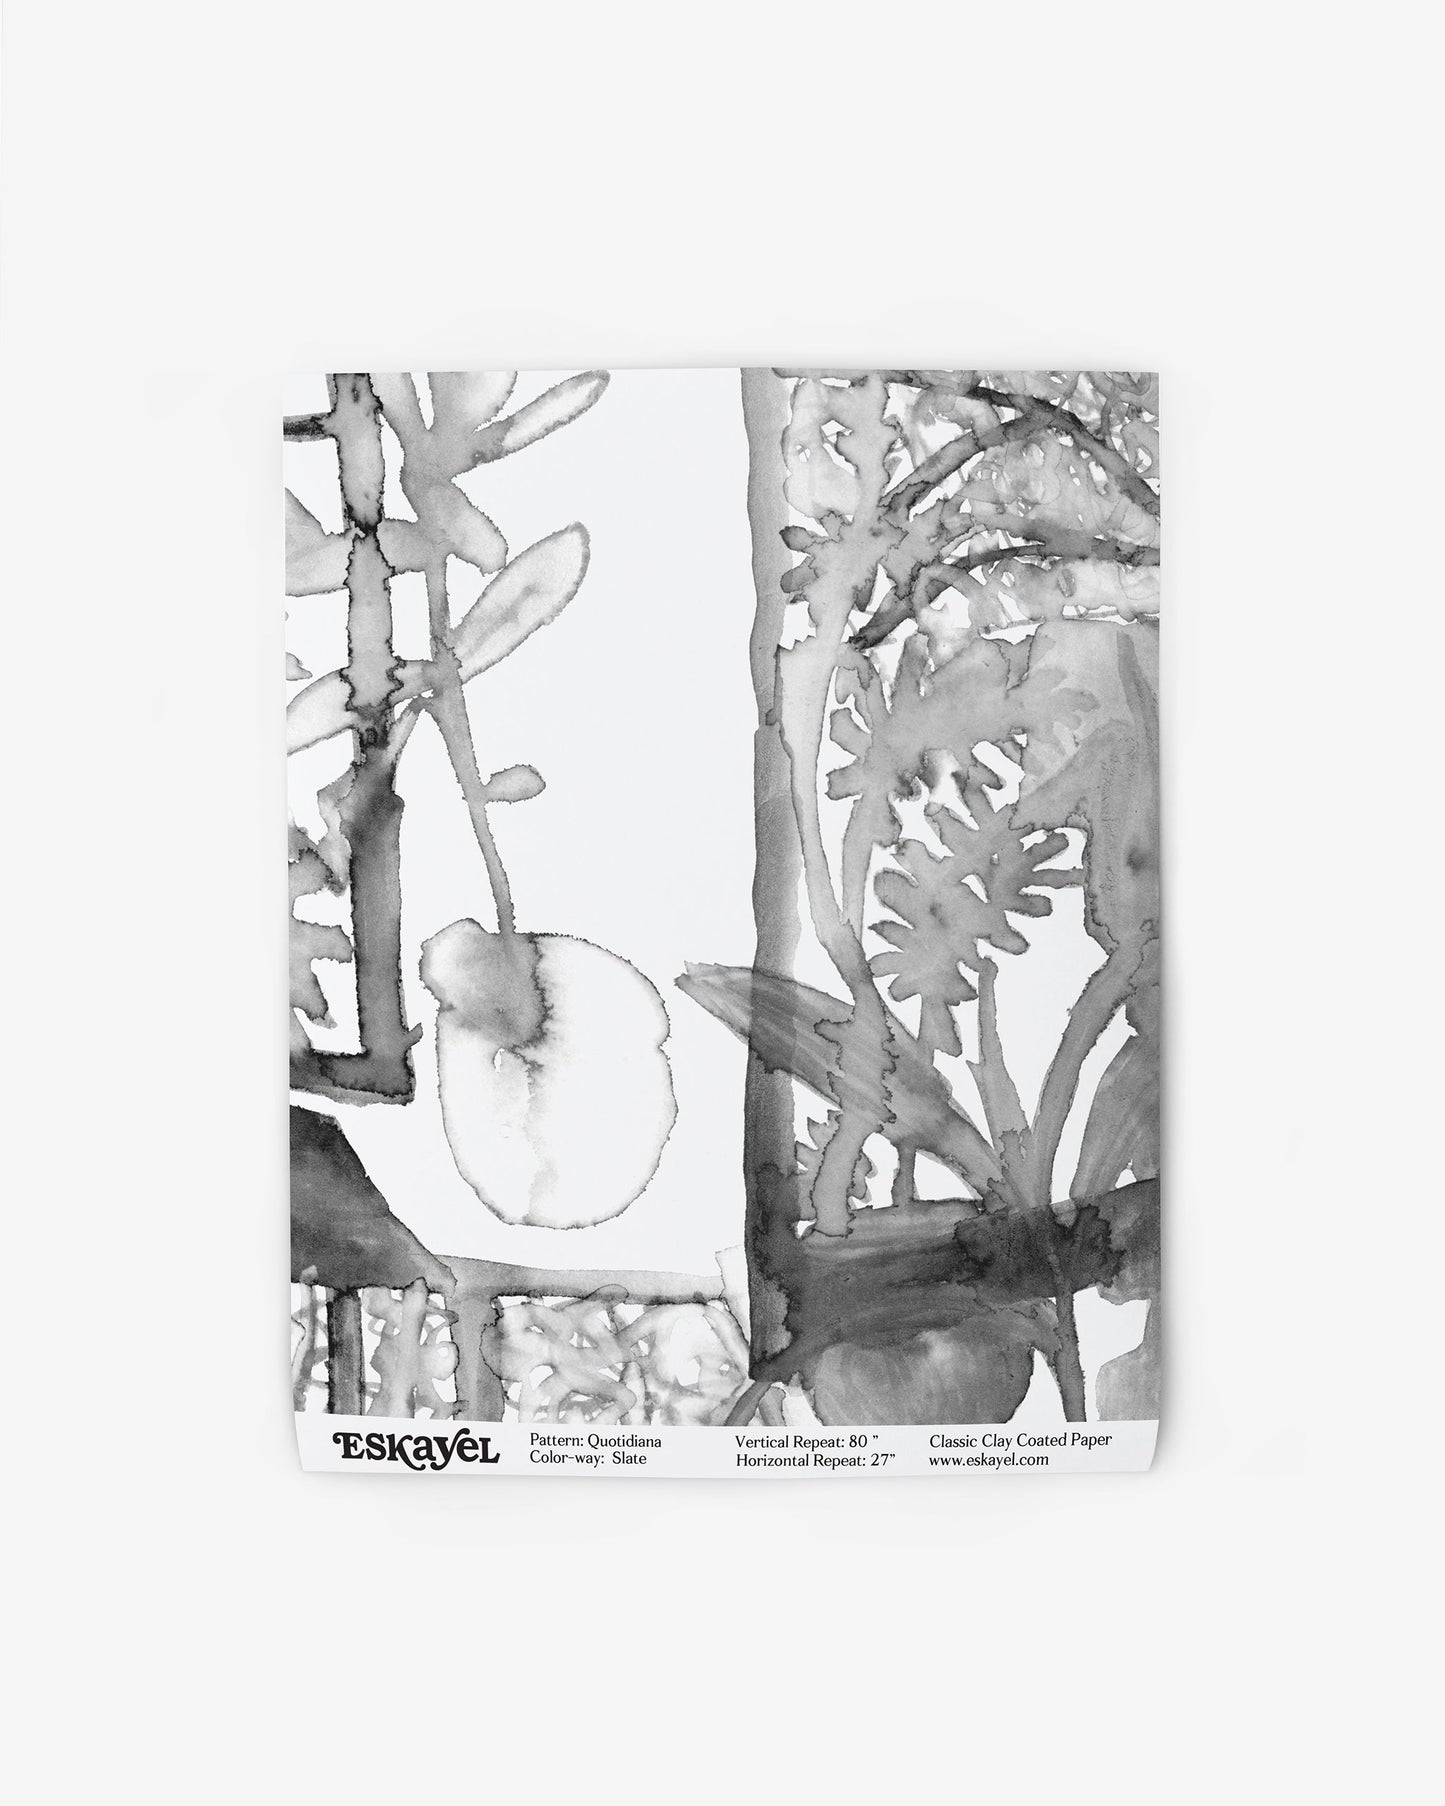 A black and white drawing of plants on a white background, ideal for Quotidiana Wallpaper||Slate or a high-end fabric or colorway.